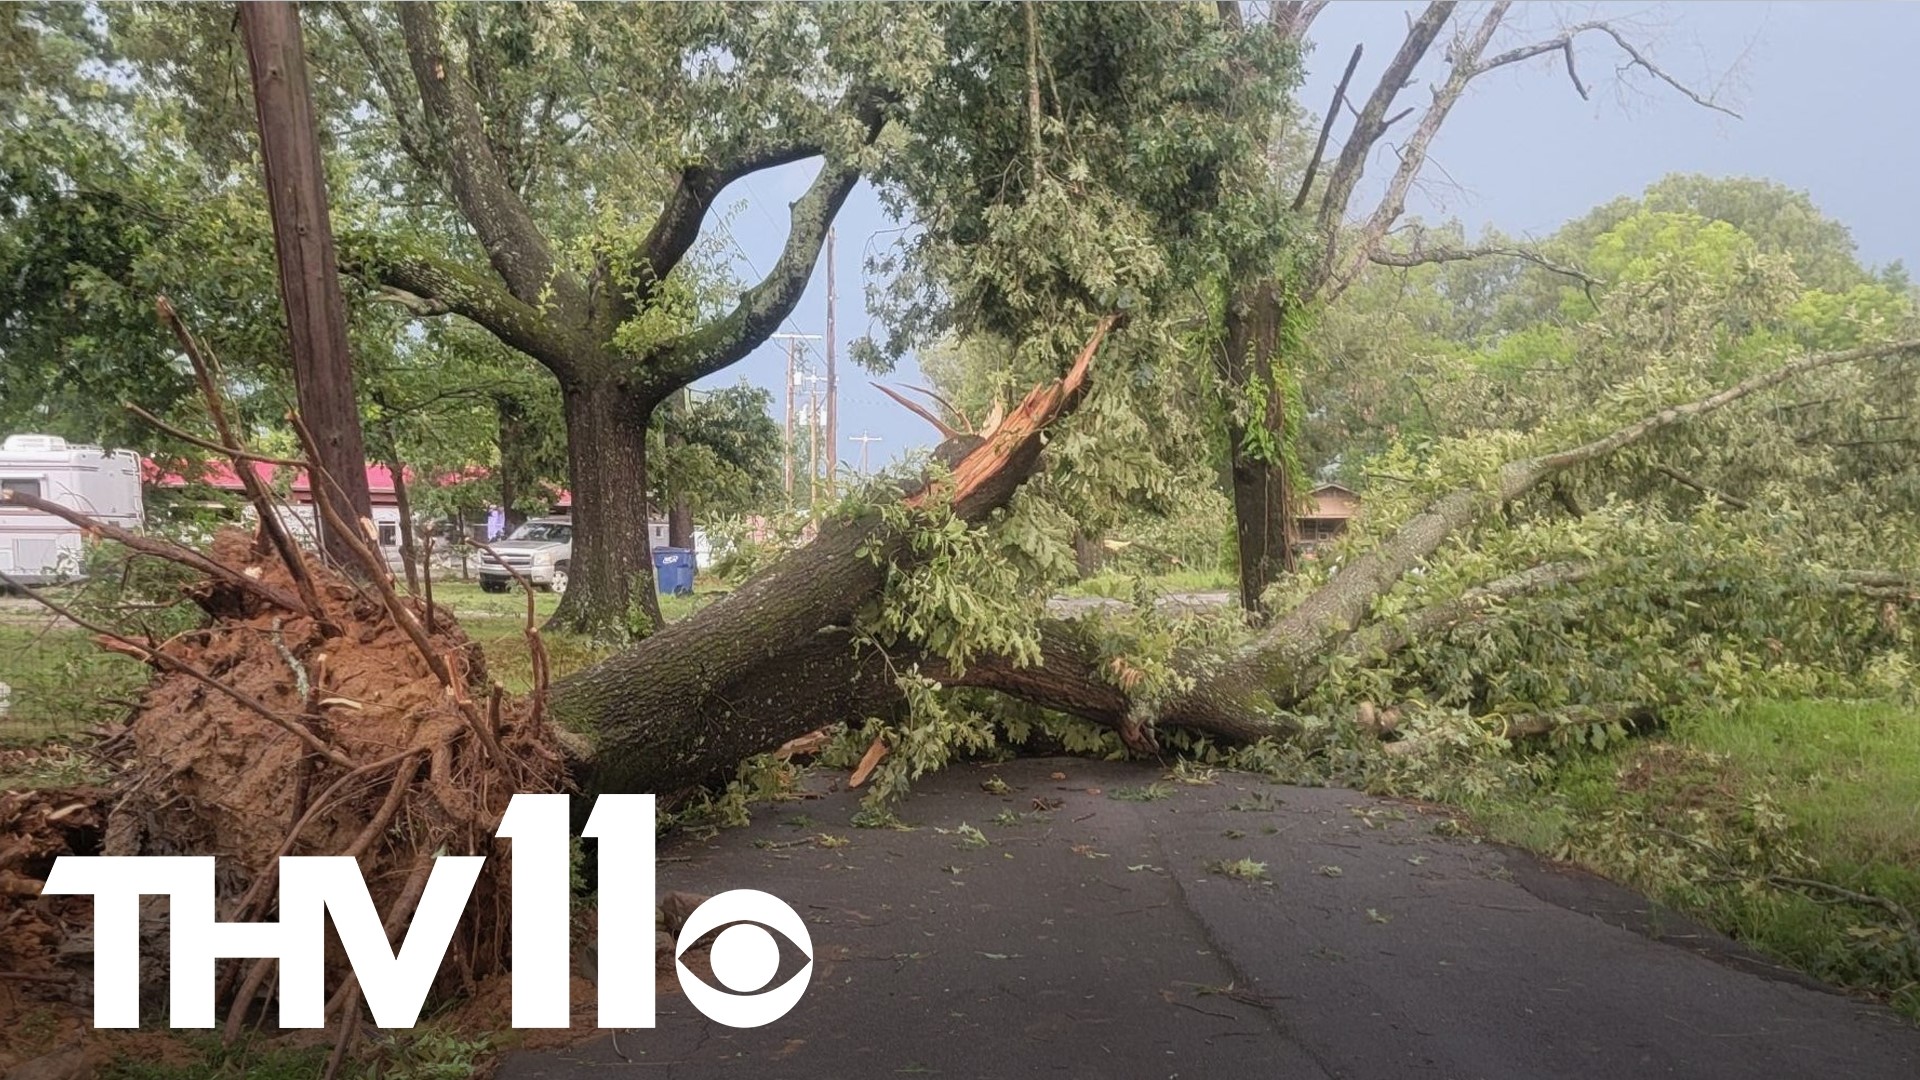 As severe thunderstorms rolled through parts of Central Arkansas they have caused downed trees, damage and thousands of people have been left without power.